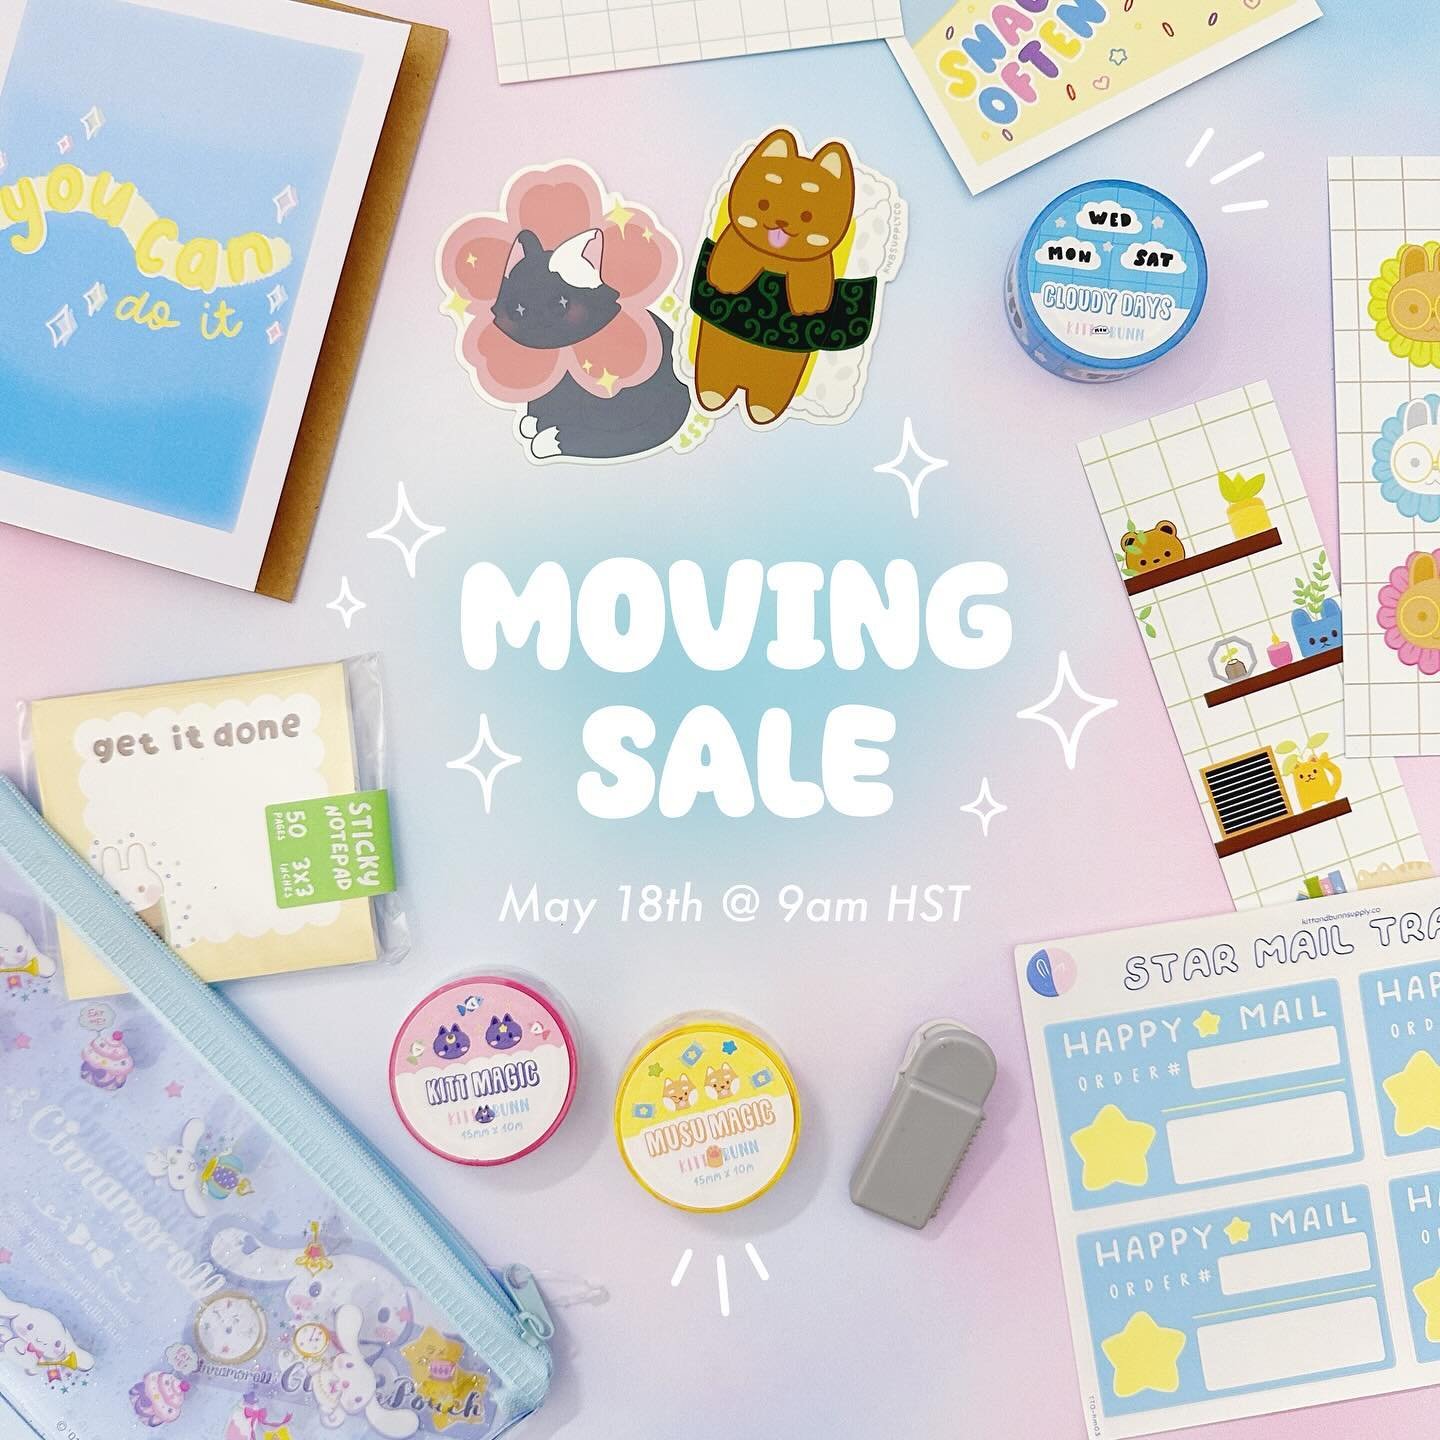 🚚💨 WE&rsquo;RE MOVING 📦 which means we&rsquo;re clearing out old inventory &amp; making room for newer projects ✨

🗓️ Saturday, May 18th @ 9am we will be dropping *very limited* grab bags of old sale items, bundling some overstock items &amp; put